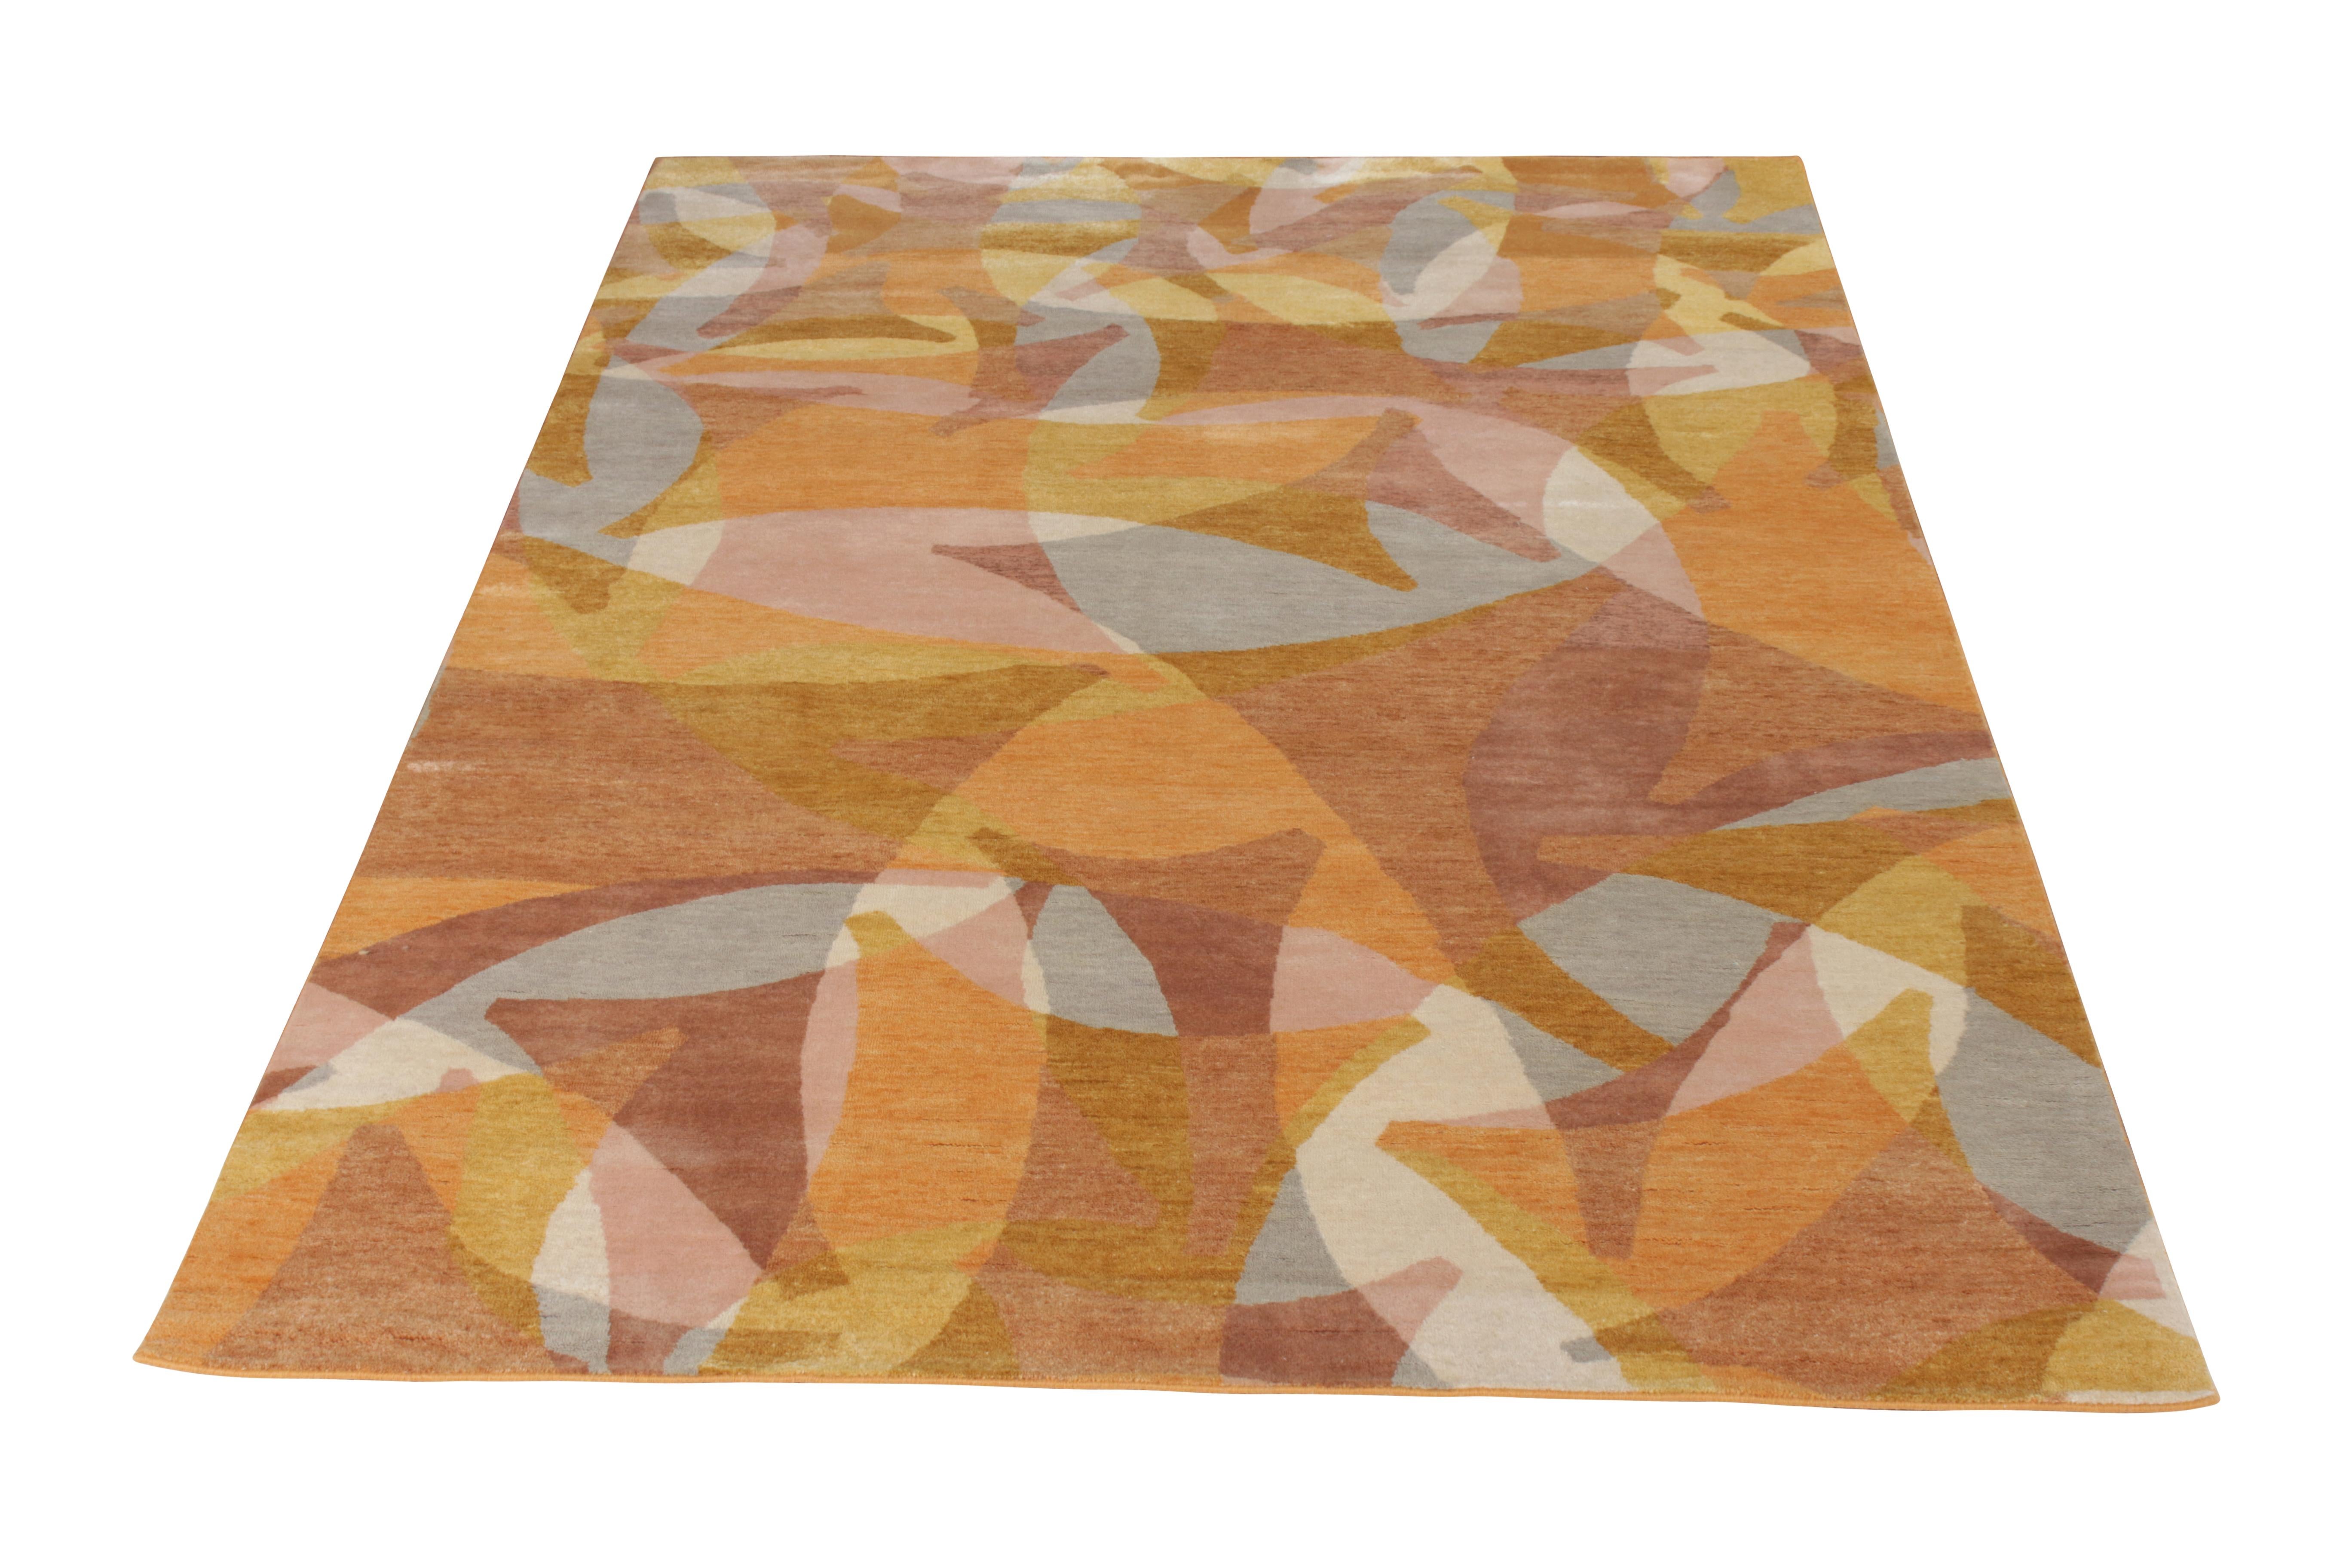 A 6 x 9 rug in hand-knotted wool, from Rug & Kilim’s bold Mid-Century Modern Collection. A fabulous marriage of unique colors in gold, beige-brown, pink, and varied accents throughout intriguing geometric patterns. Enjoying versatile size, engaging